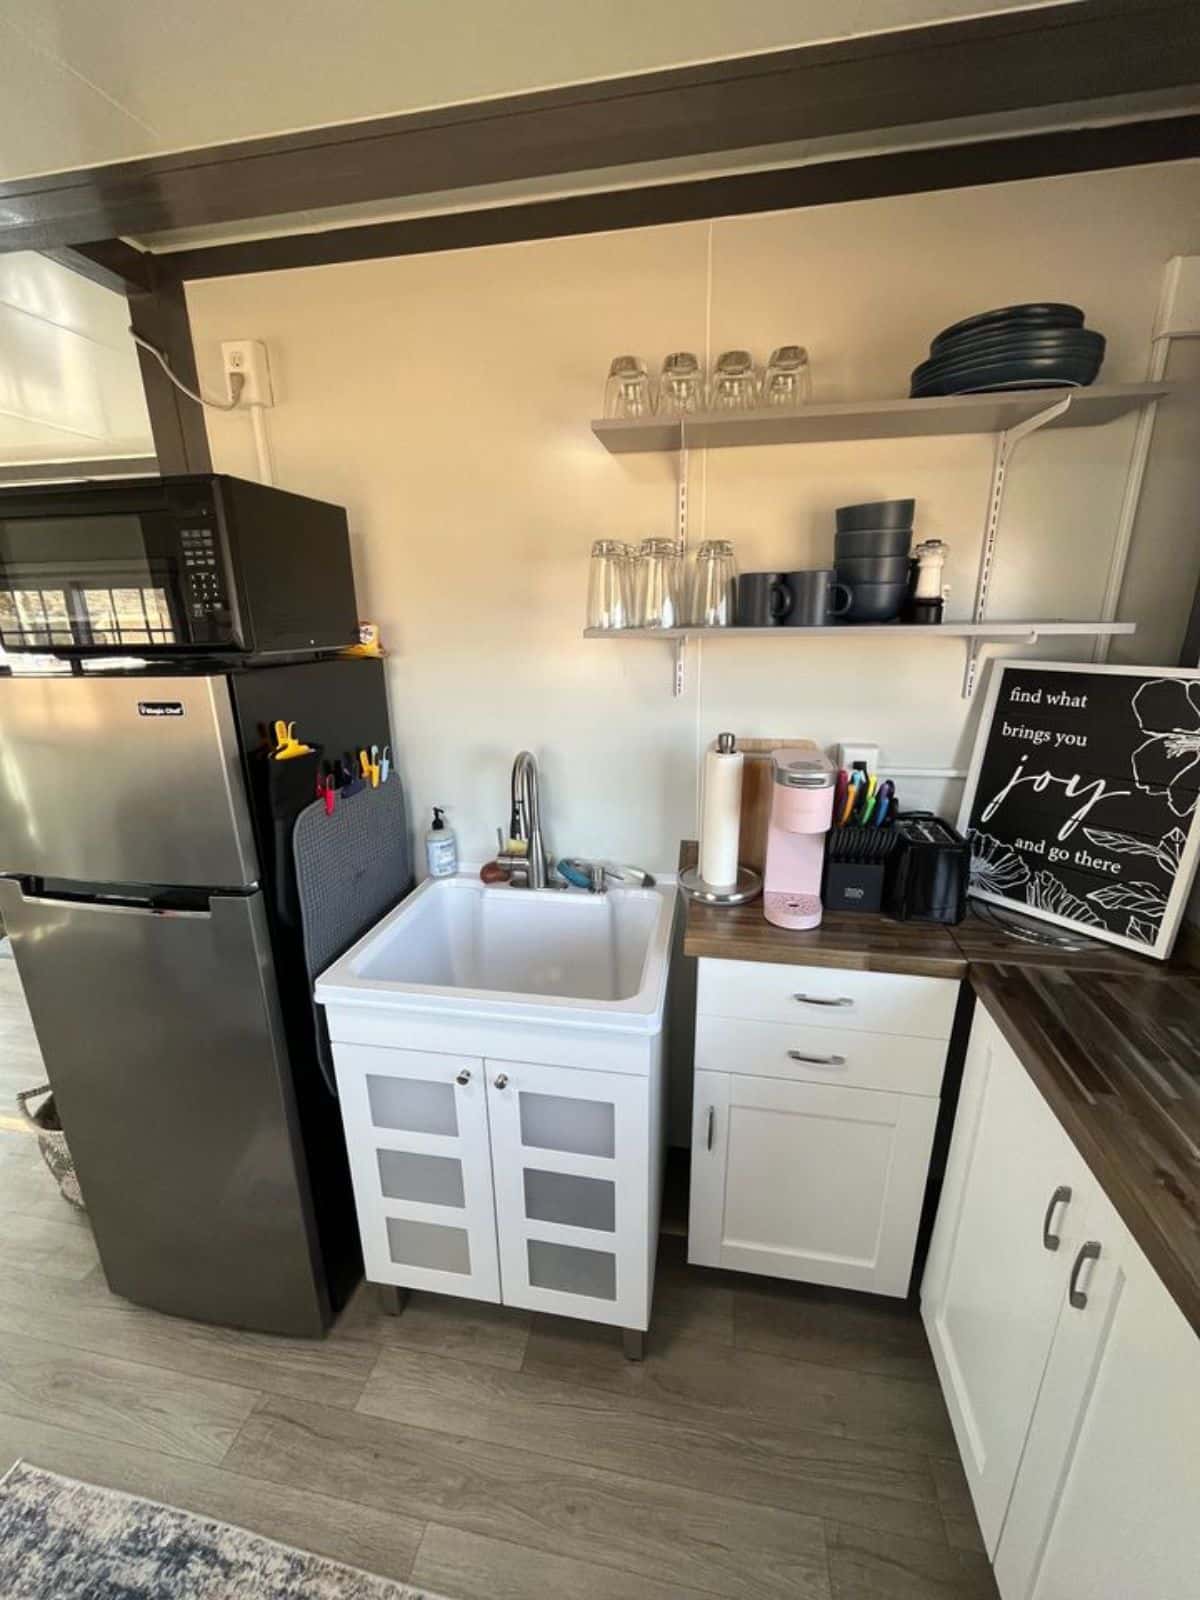 Kitchen area of 20’ unique tiny home with all the necessary appliances